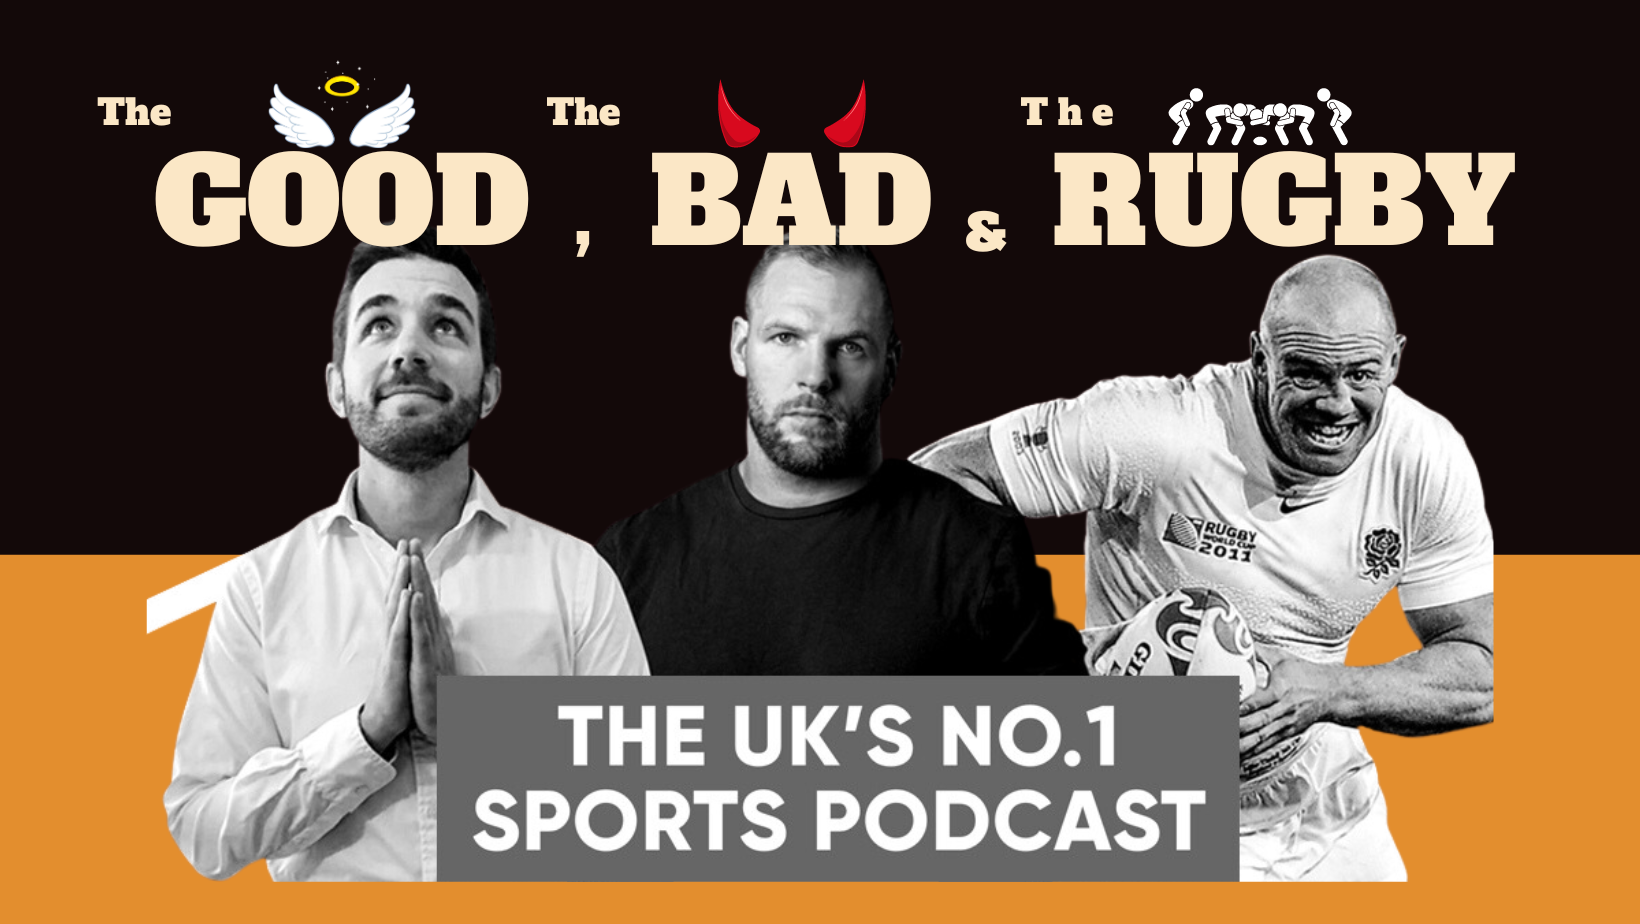 The Good, The Bad & The Rugby Podcast – Listen Here